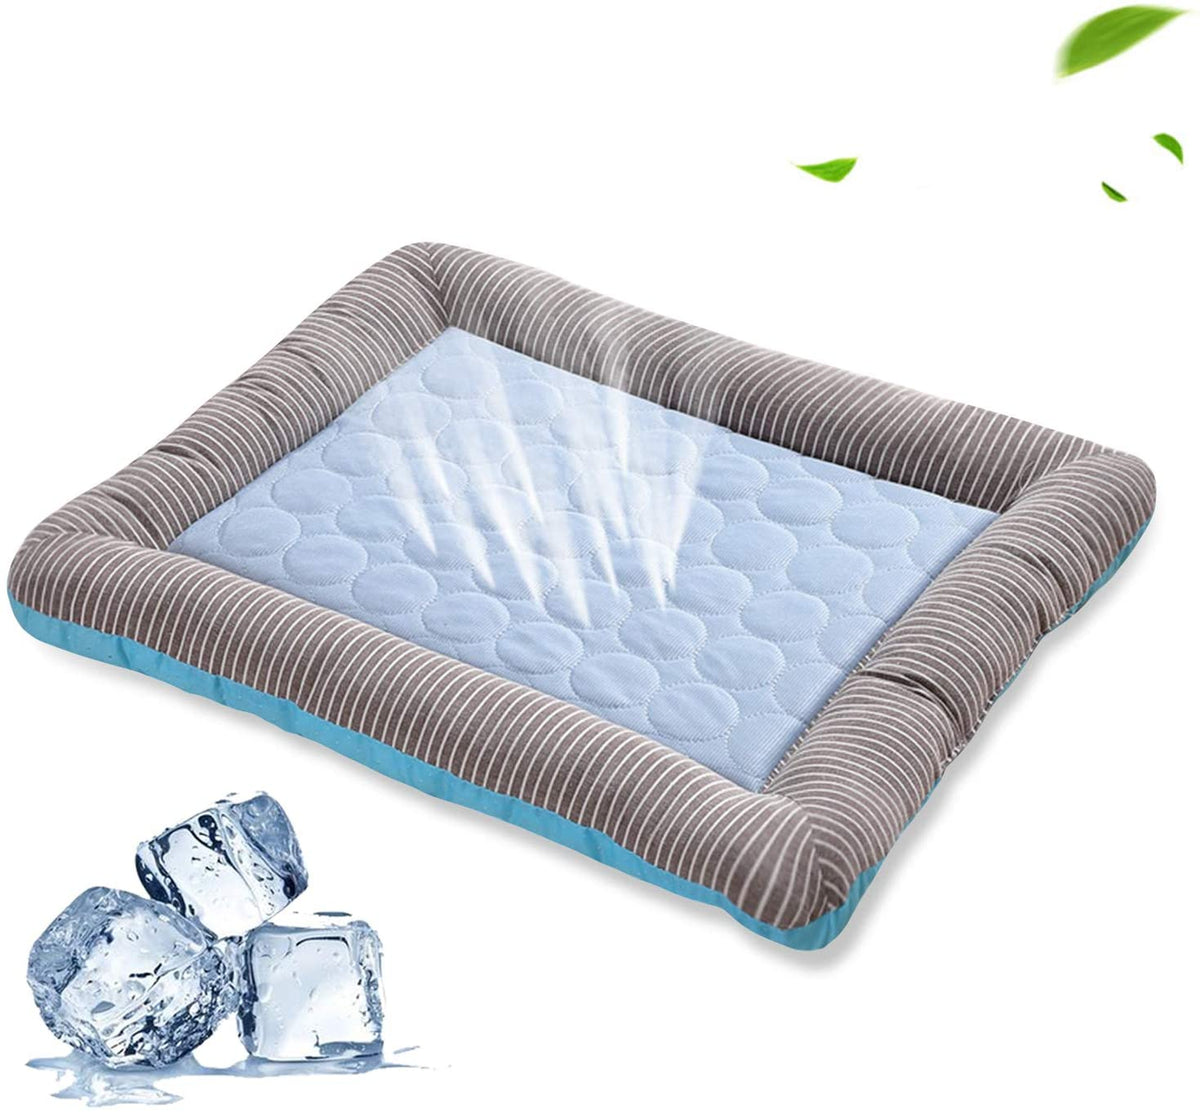 Pet Cooling Pad Bed For Dogs Cats